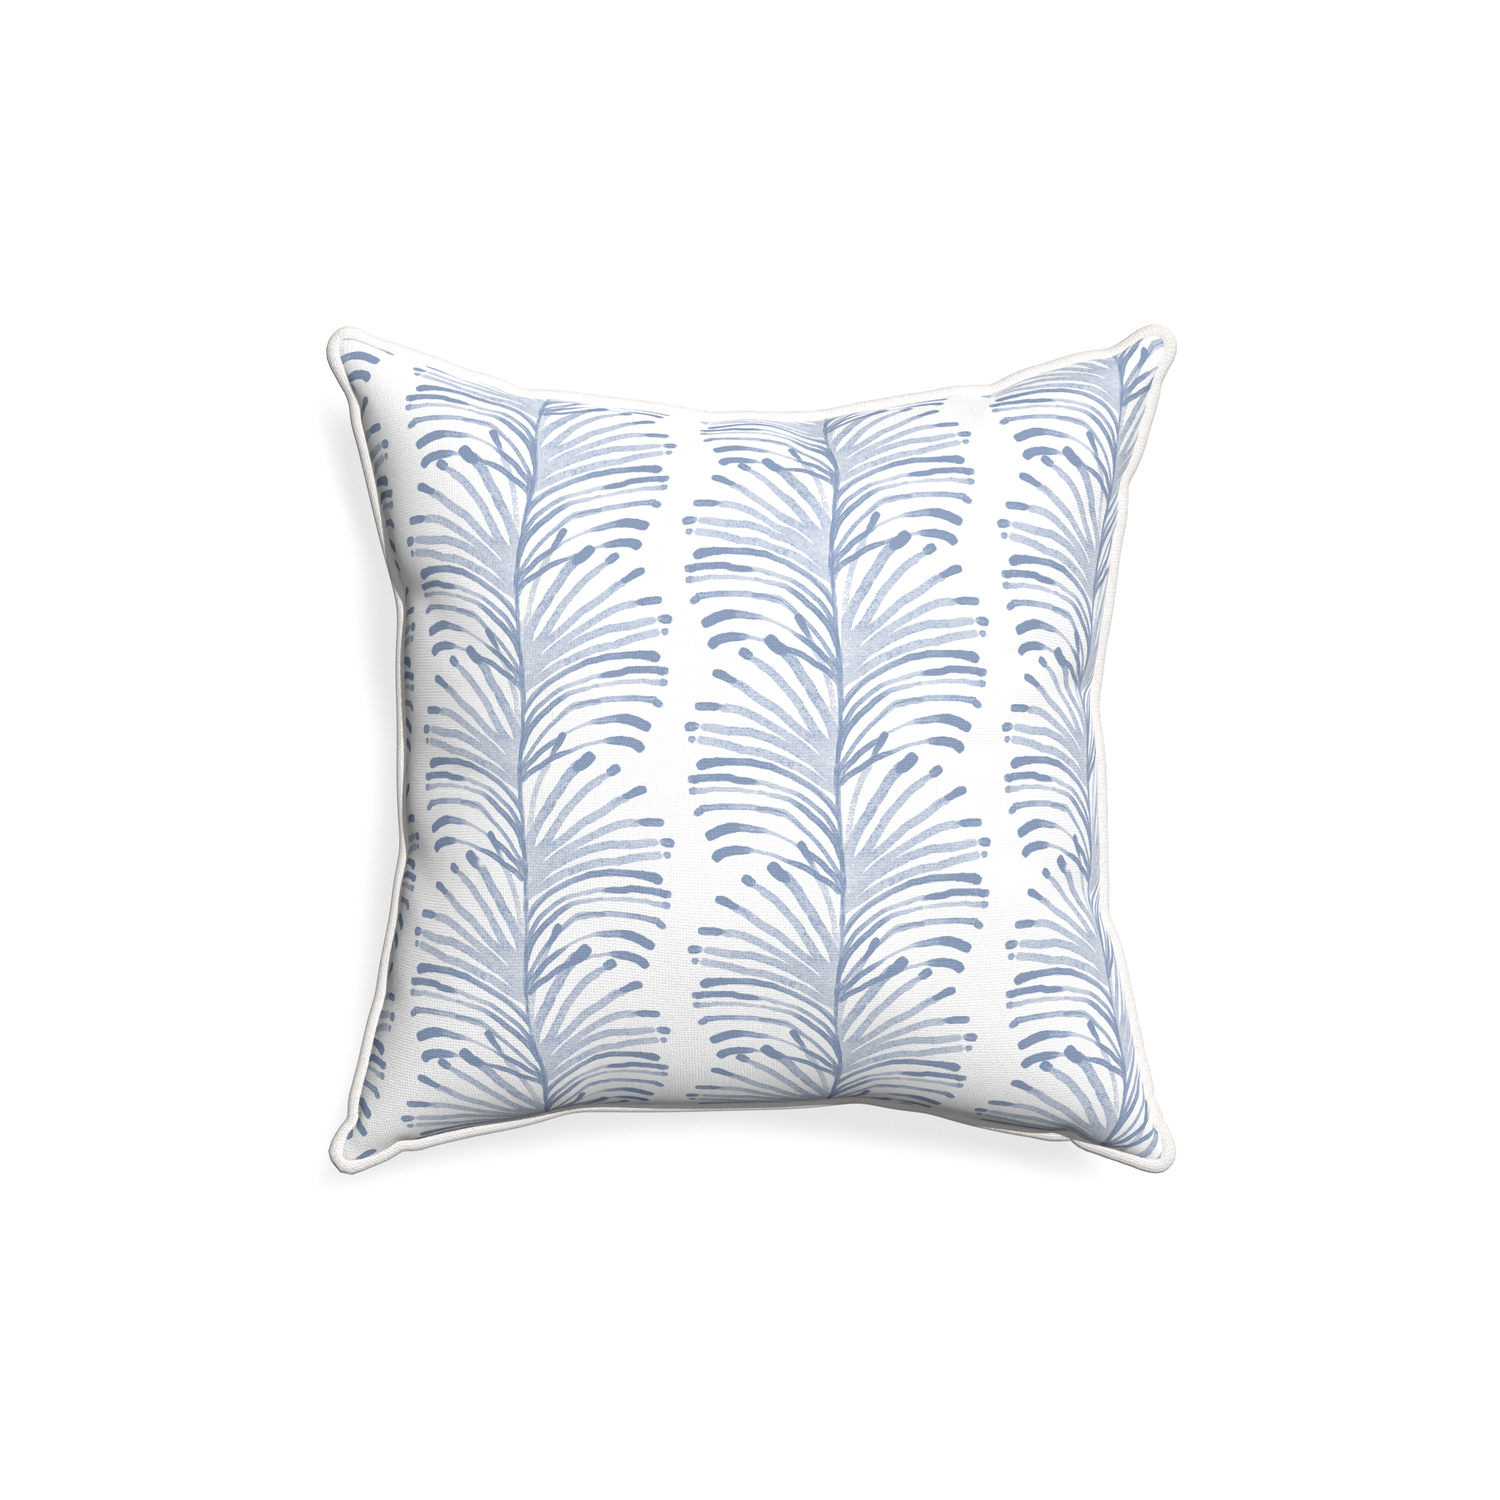 18-square emma sky custom sky blue botanical stripepillow with snow piping on white background